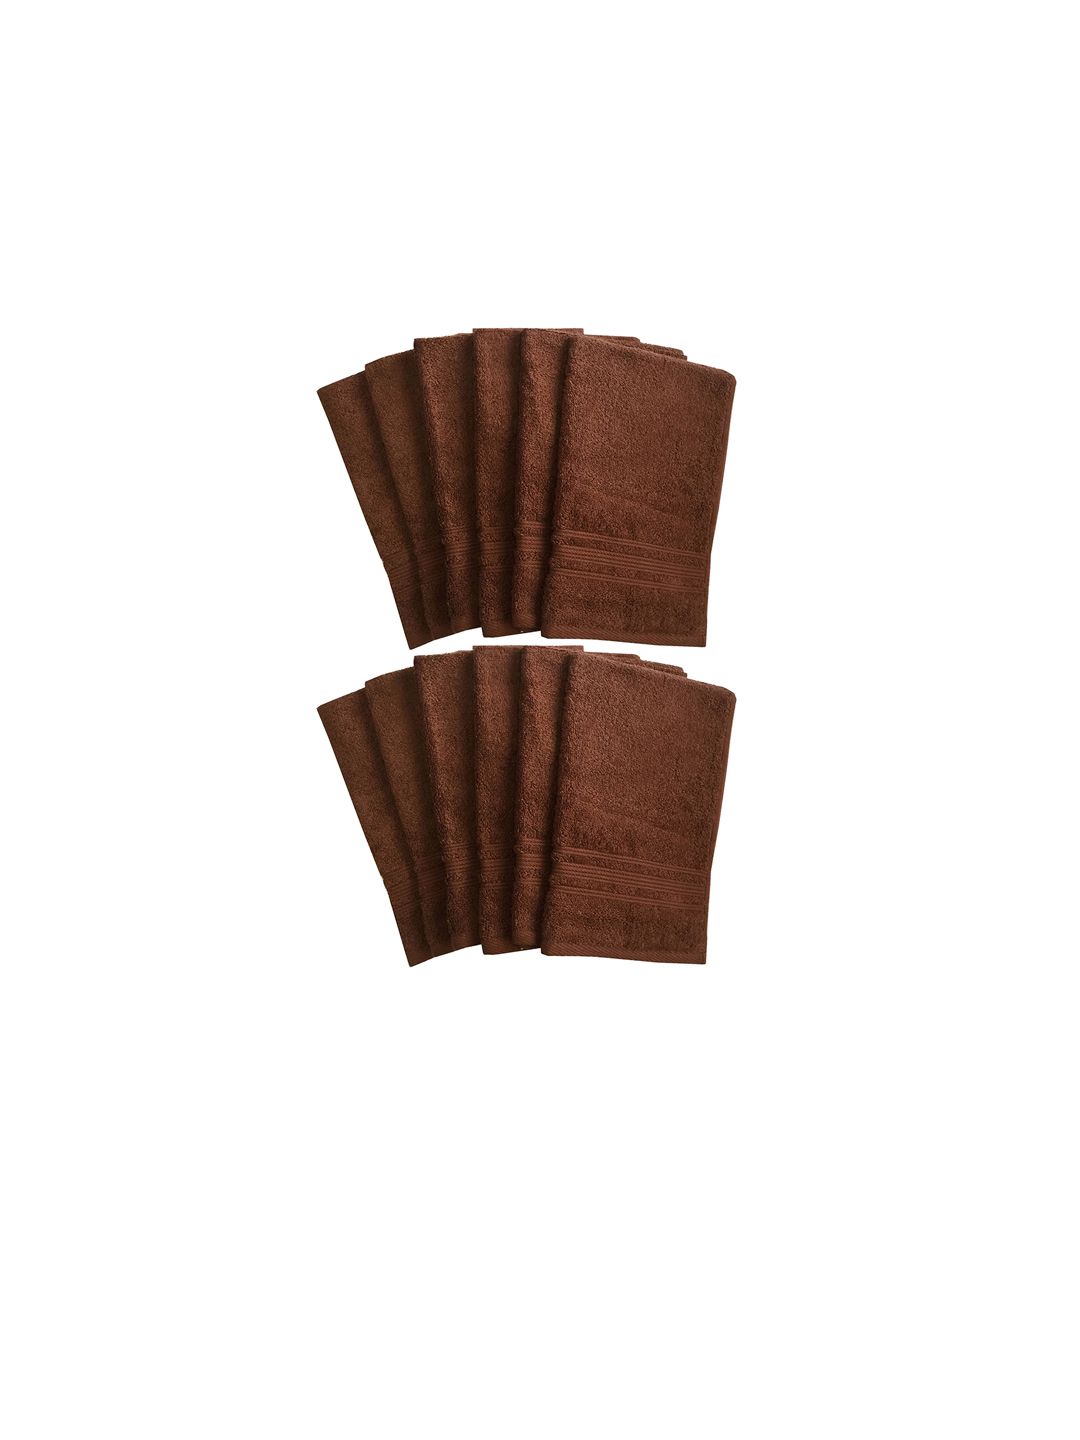 Lushomes Set of 12 Brown 450 GSM Super Soft and Fluffy Hand Towels Price in India